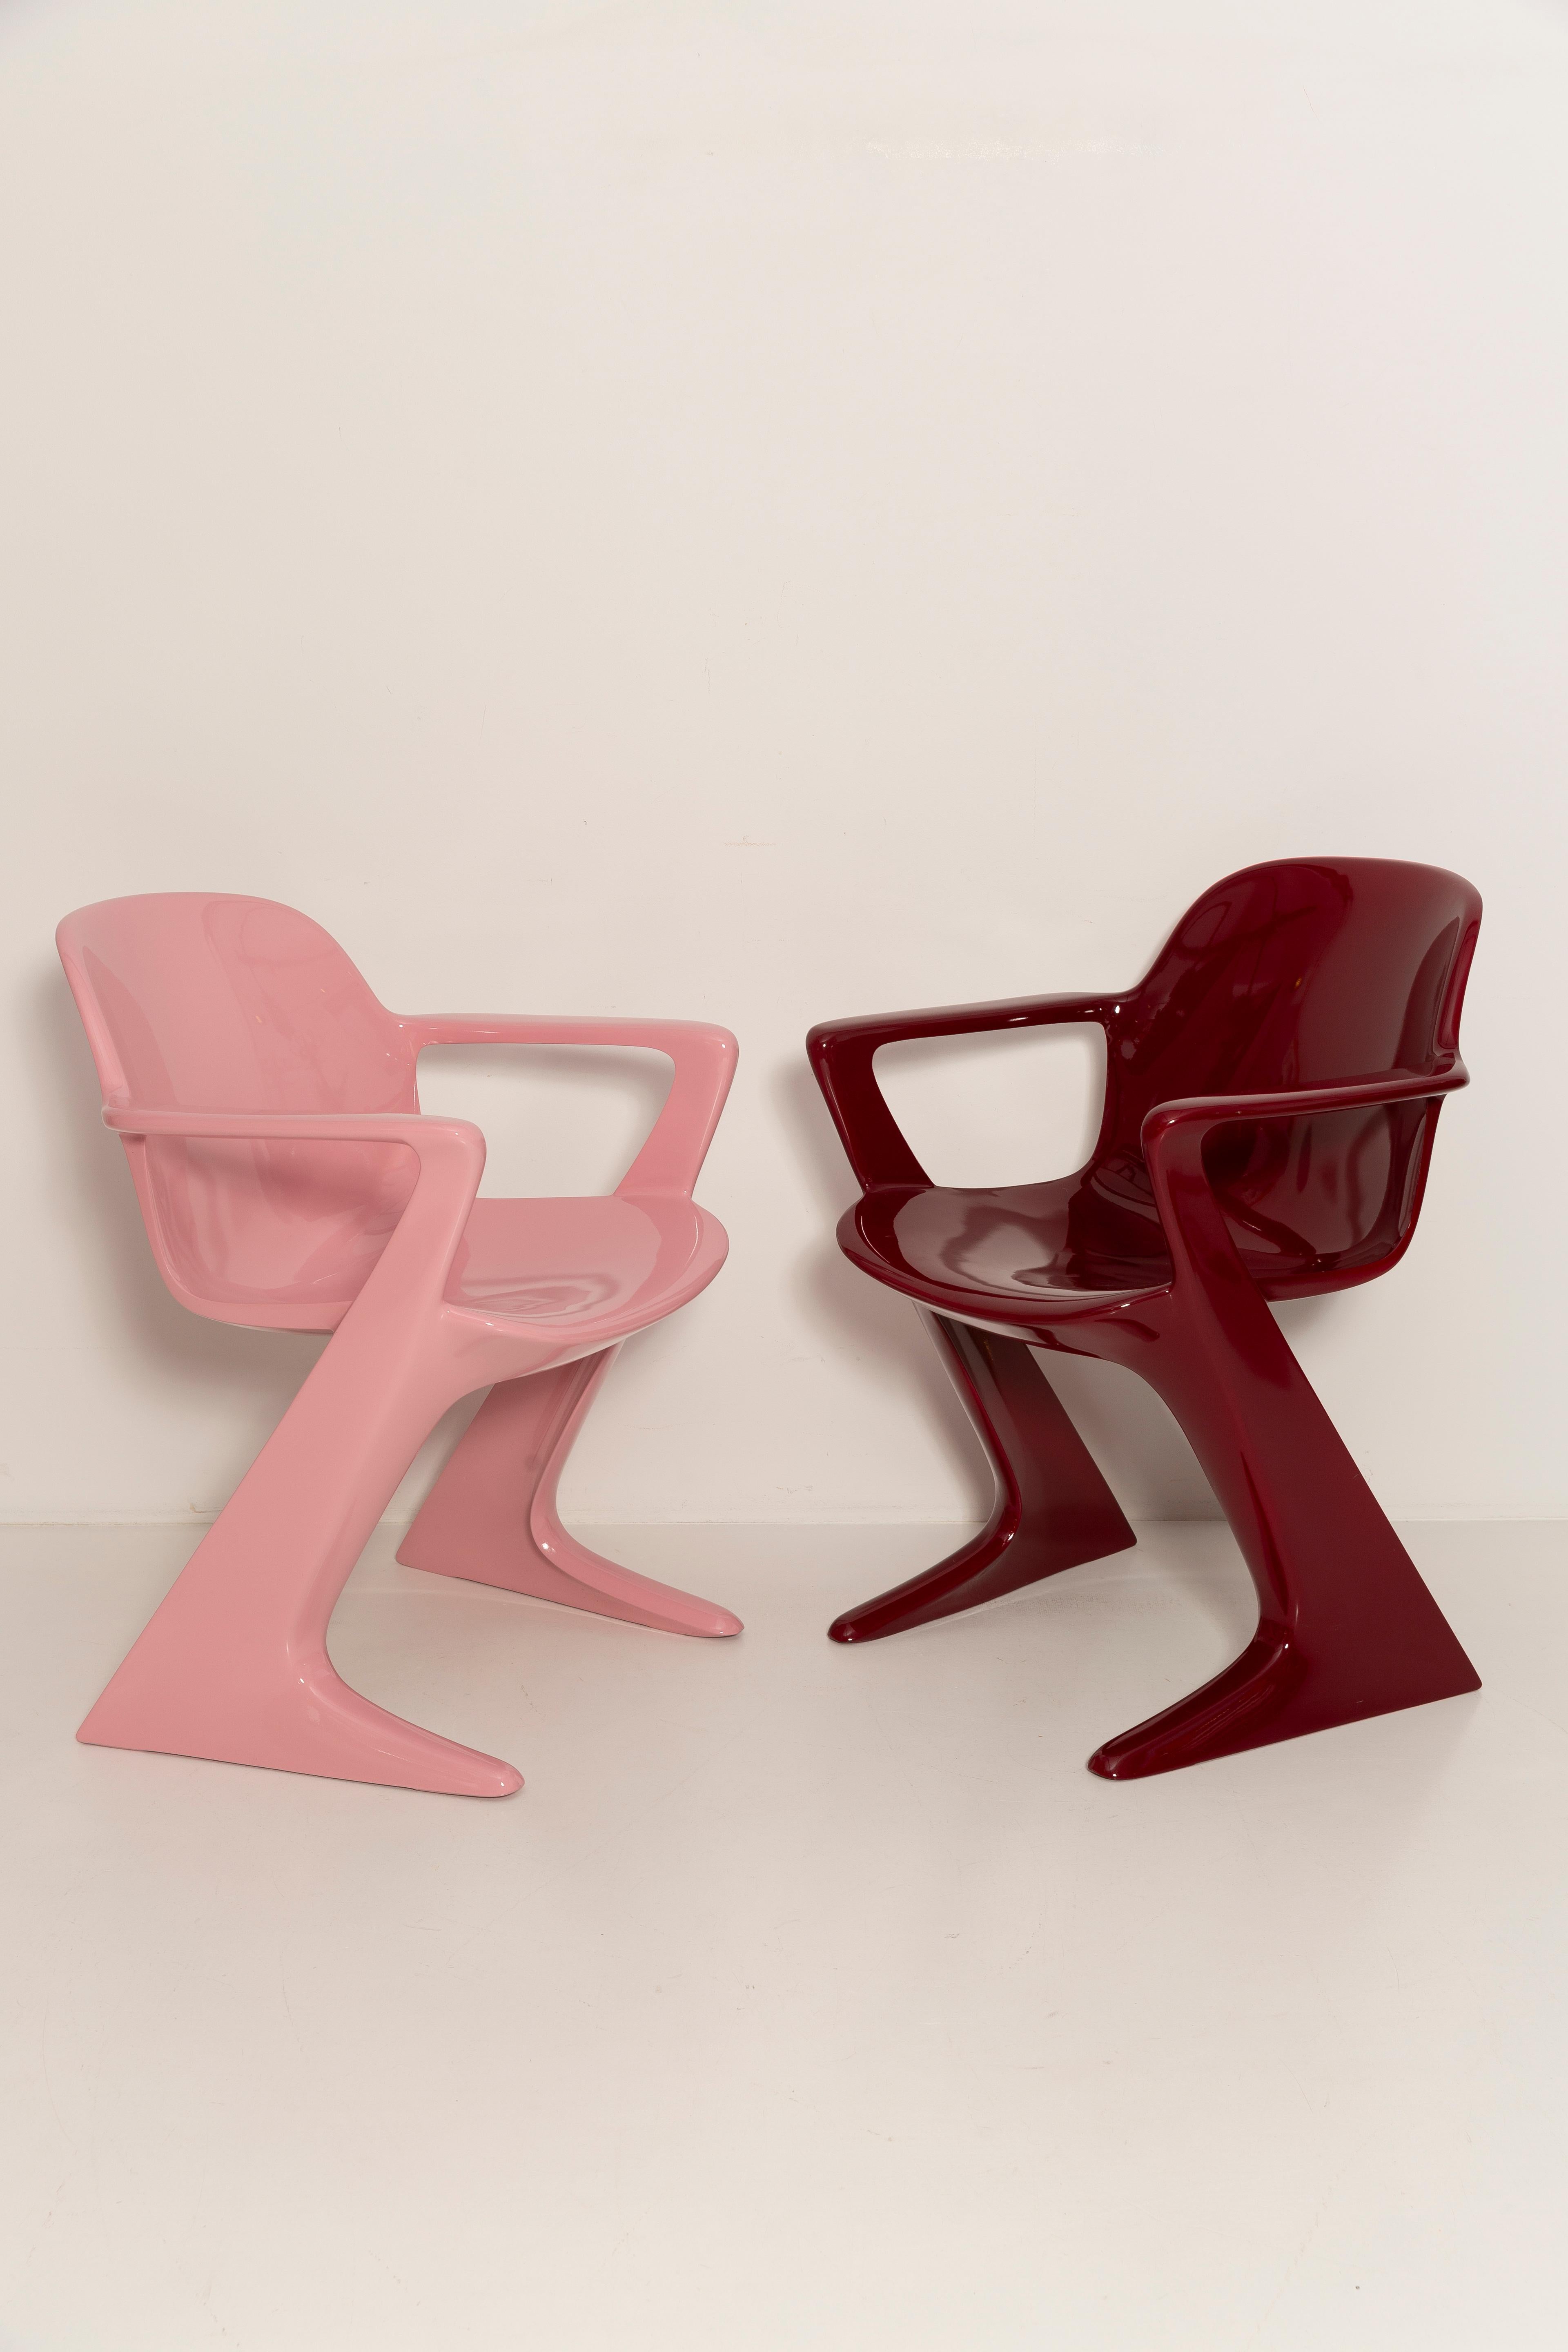 20th Century Set of Six Mid Century Kangaroo Chairs, Ernst Moeckl, Germany, 1968 For Sale